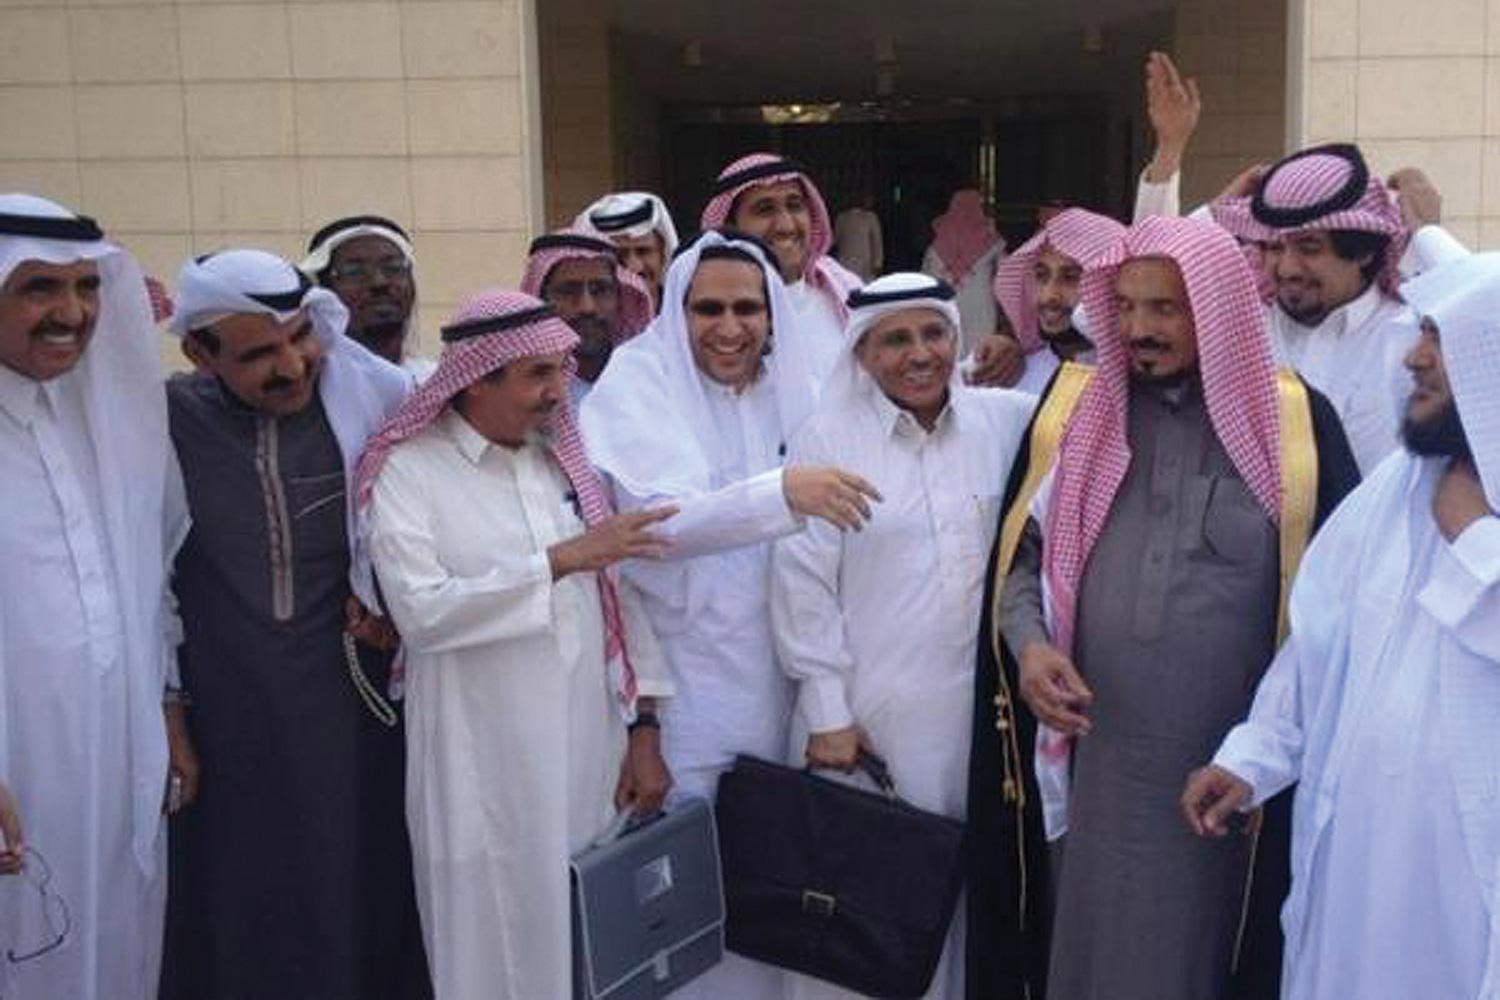 Saudi human rights activists gather outside the Criminal Court of Riyadh following a hearing in the trial of fellow activists Abdullah al-Hamid and Mohammed al-Qahtani. 